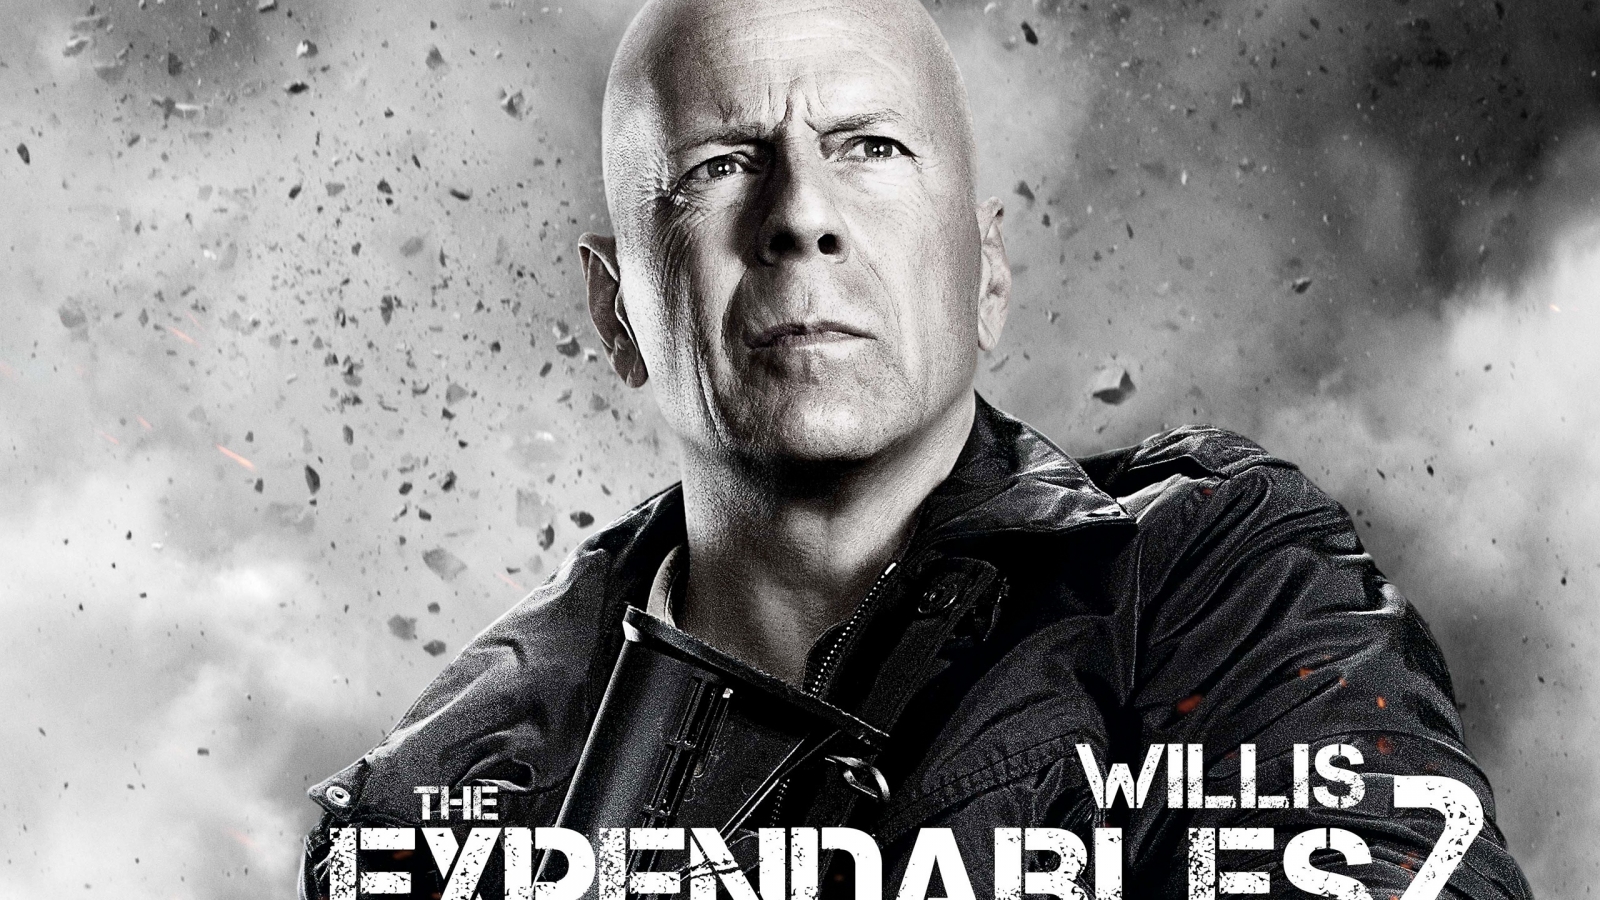 Bruce Willis Expendables 2 for 1600 x 900 HDTV resolution